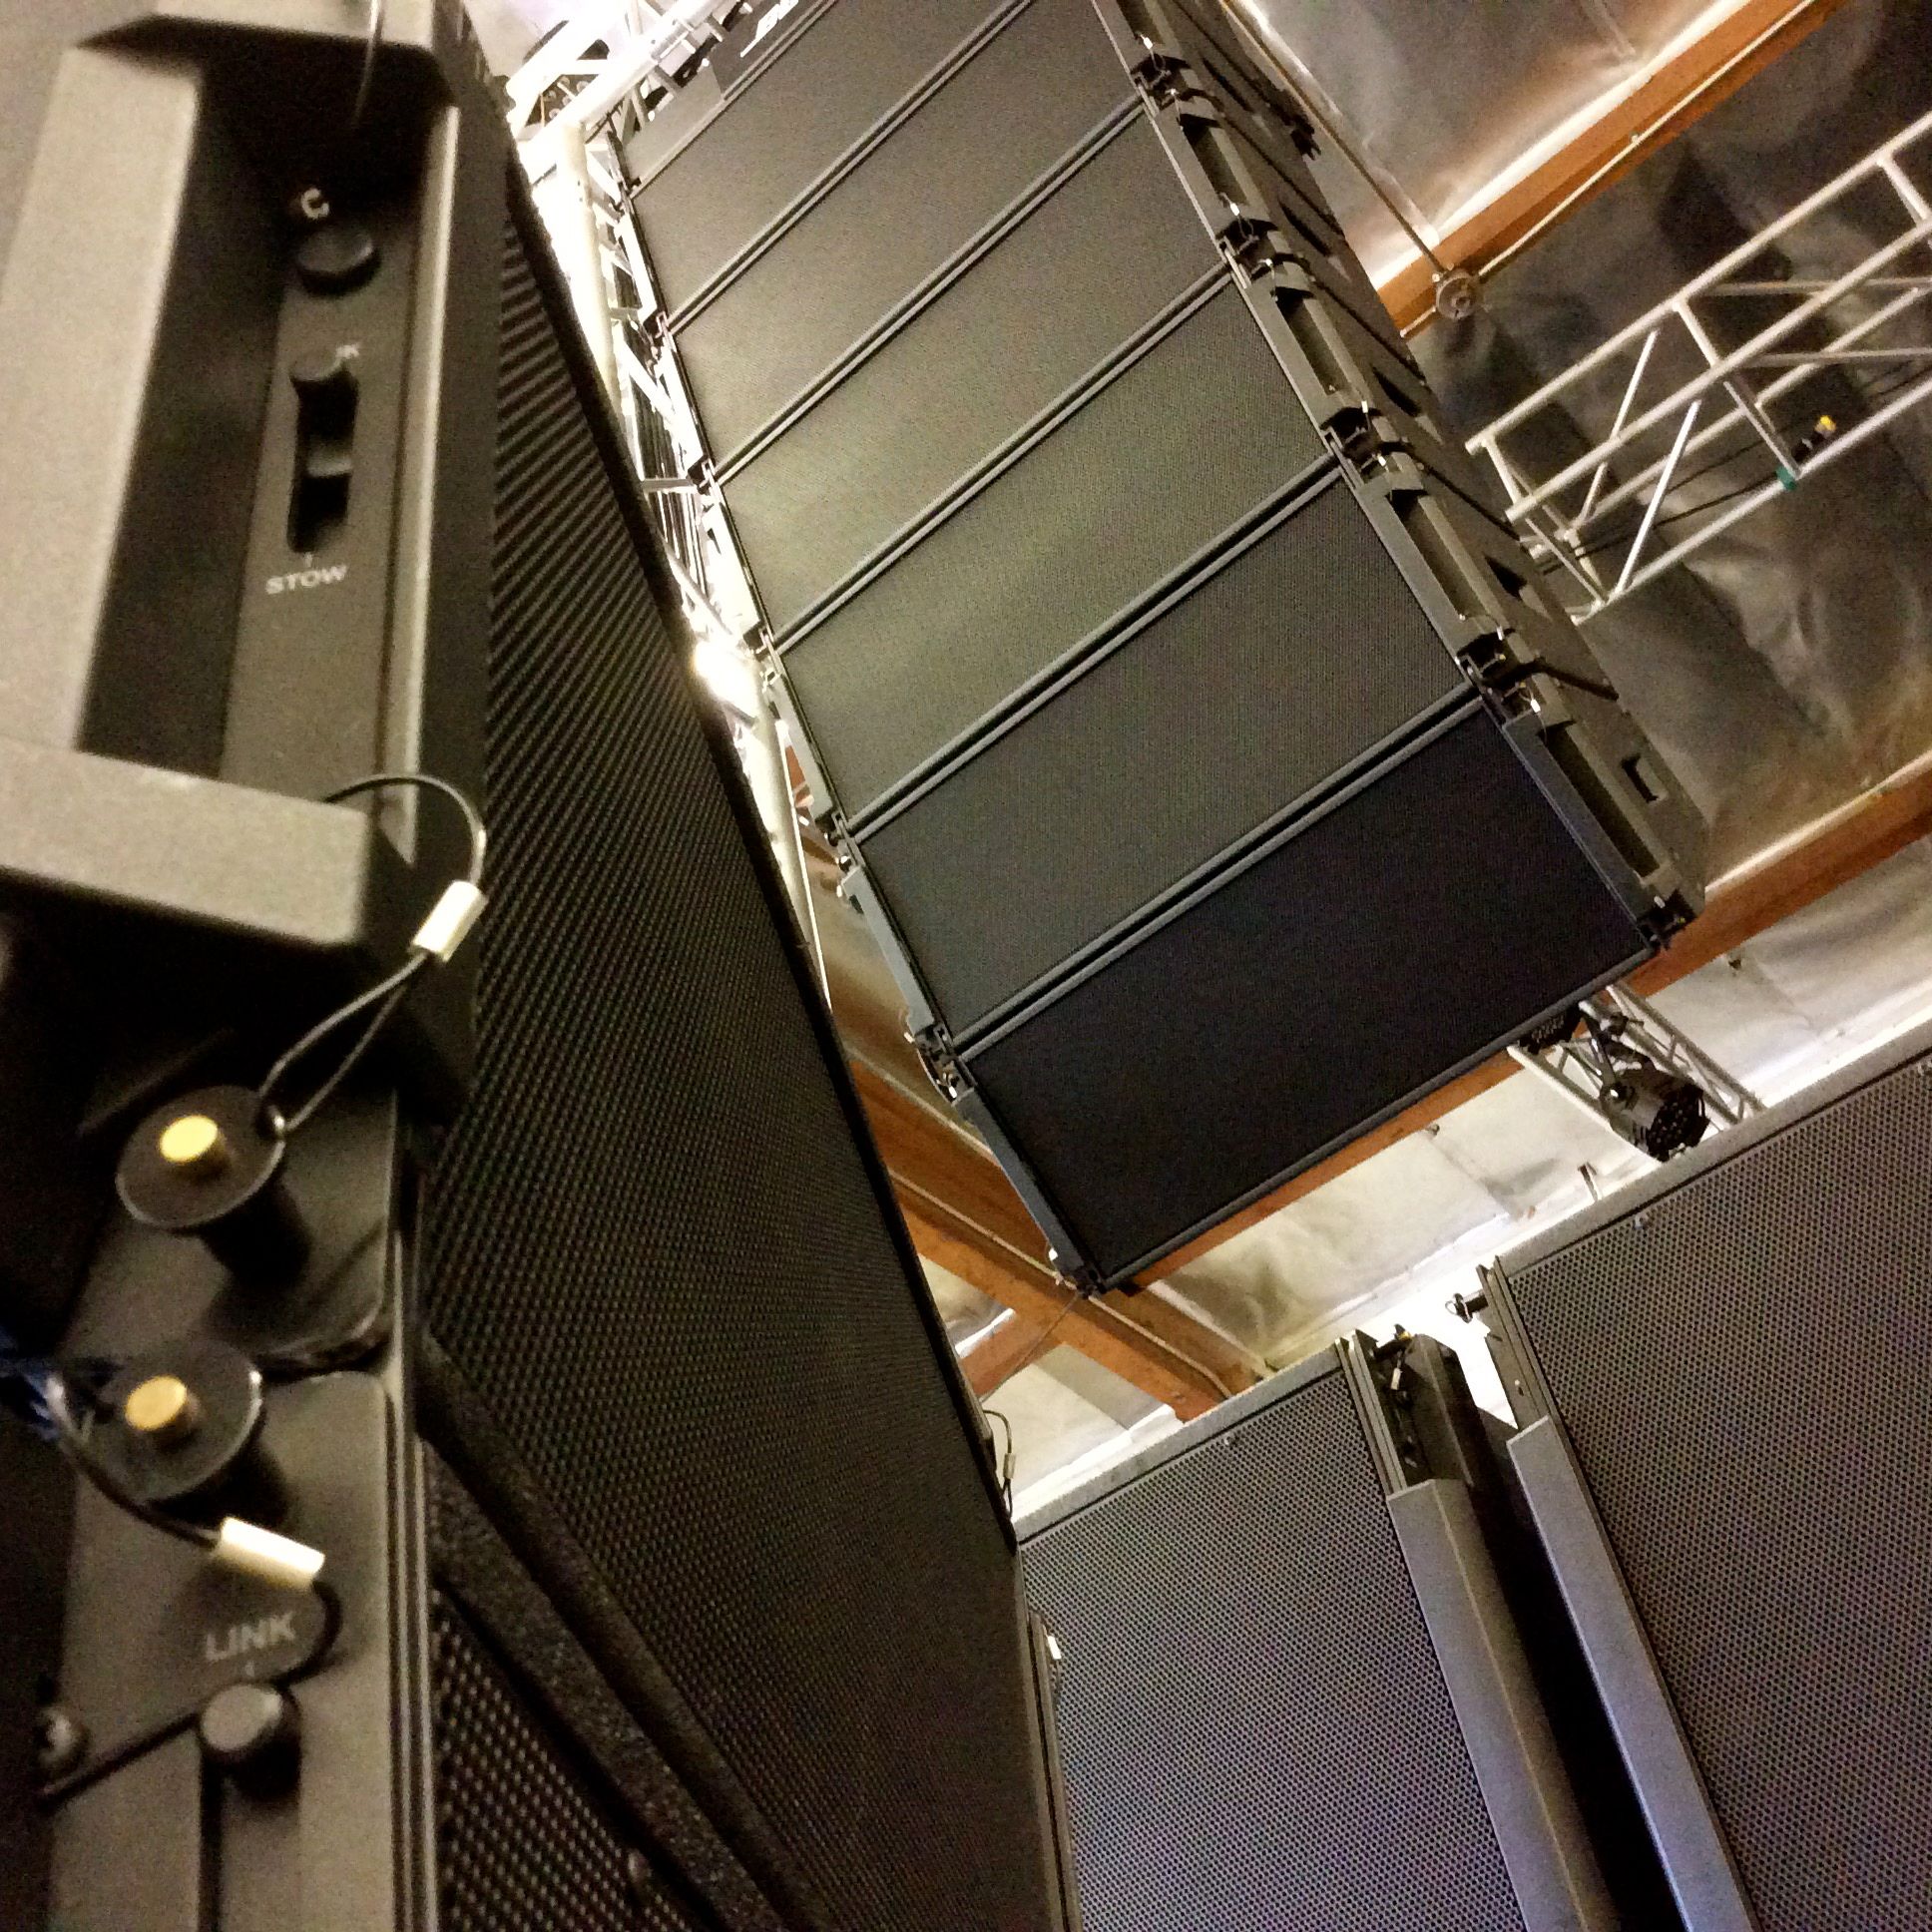 The Bose ShowMatch System at Hollywood Sound Systems